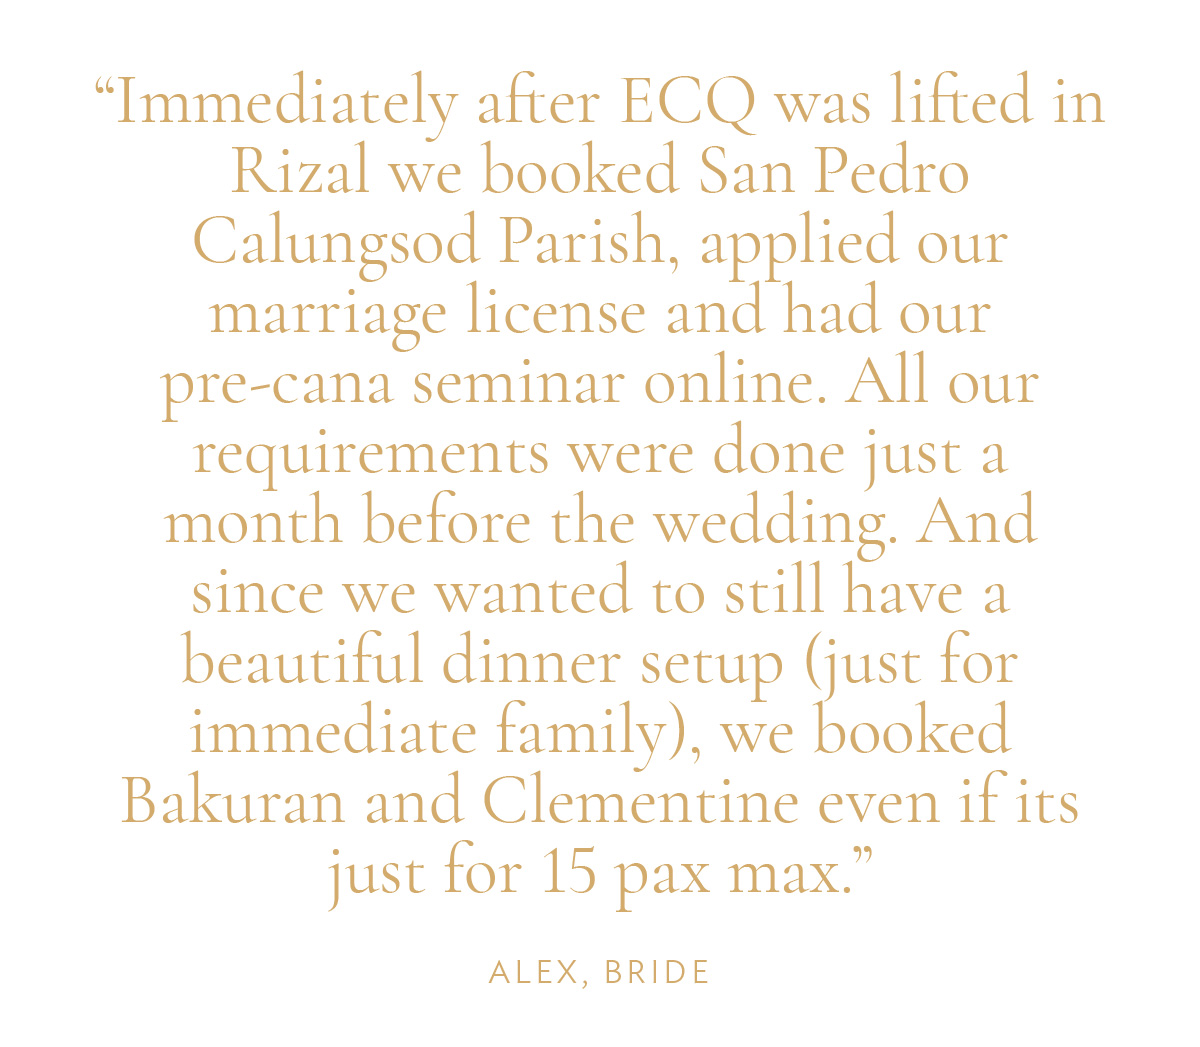 "Immediately after ECQ was lifted in Rizal we booked San Pedro Calungsod Parish, applied our marriage license and had our pre-cana seminar online. All our requirements were done just a month before the wedding. And since we wanted to still have a beautiful dinner setup (just for immediate family), we booked Bakuran and Clementine even if its just for 15 pax max." -Alex, Bride